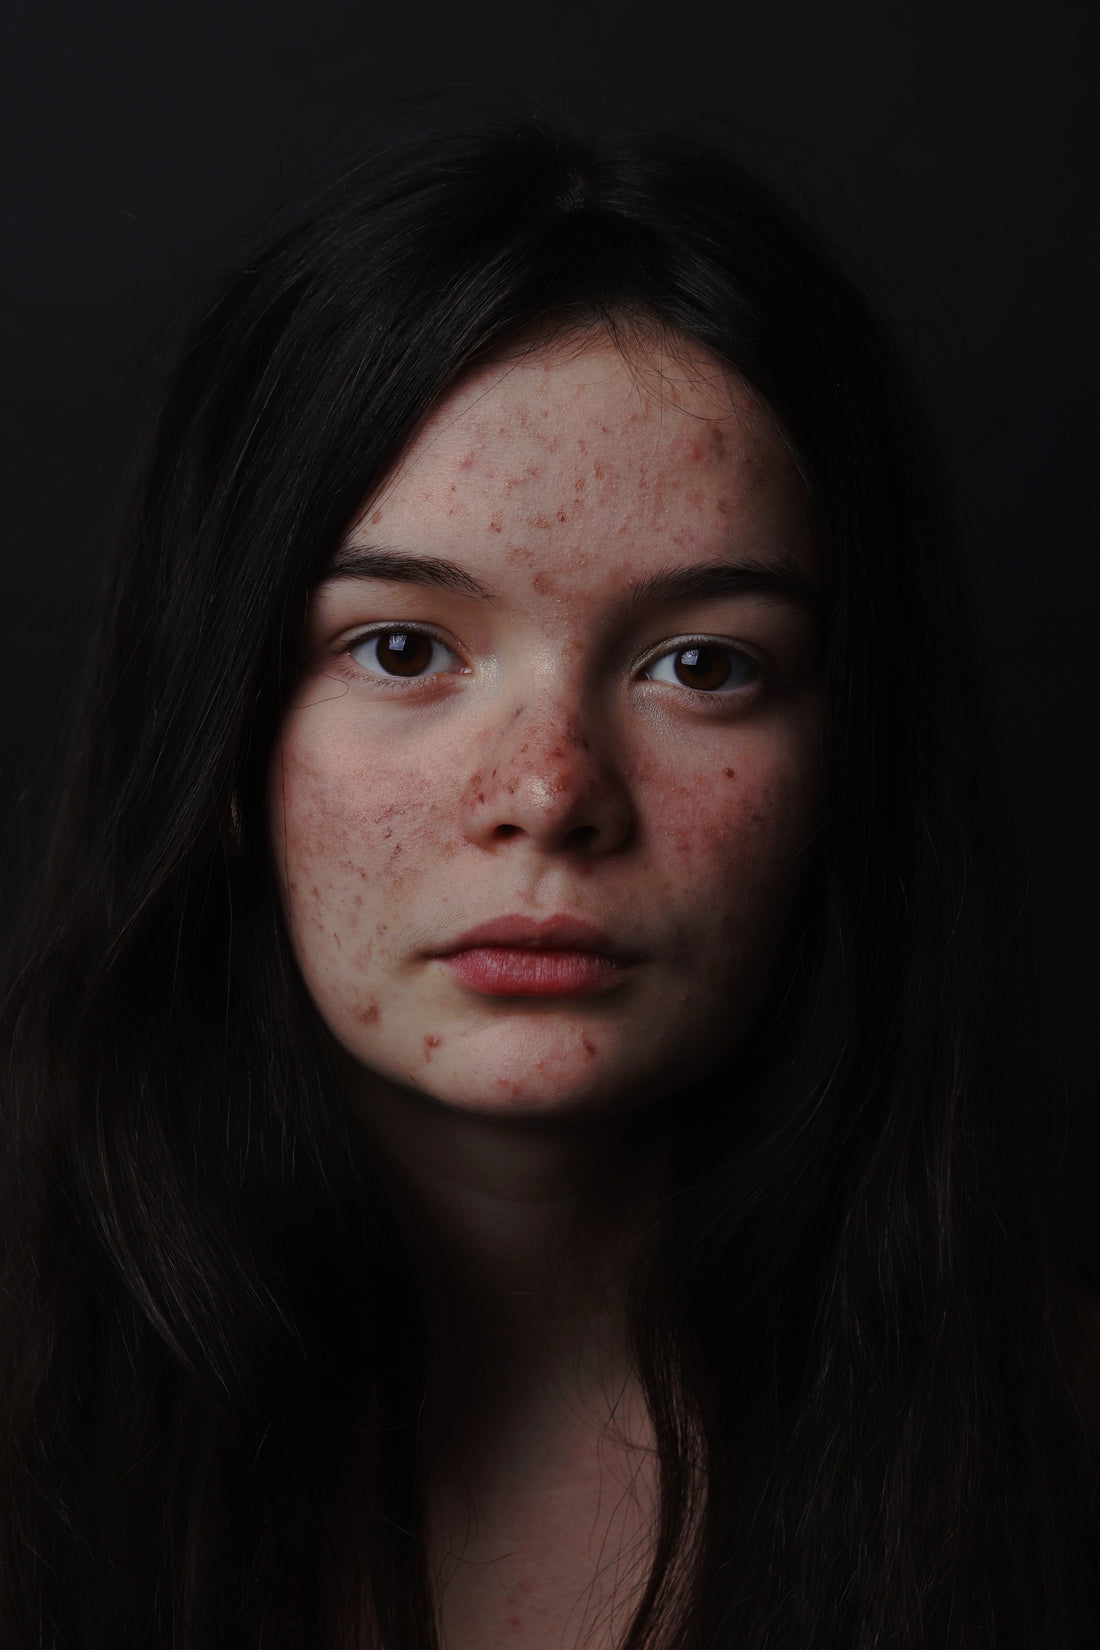 A girl with acnes